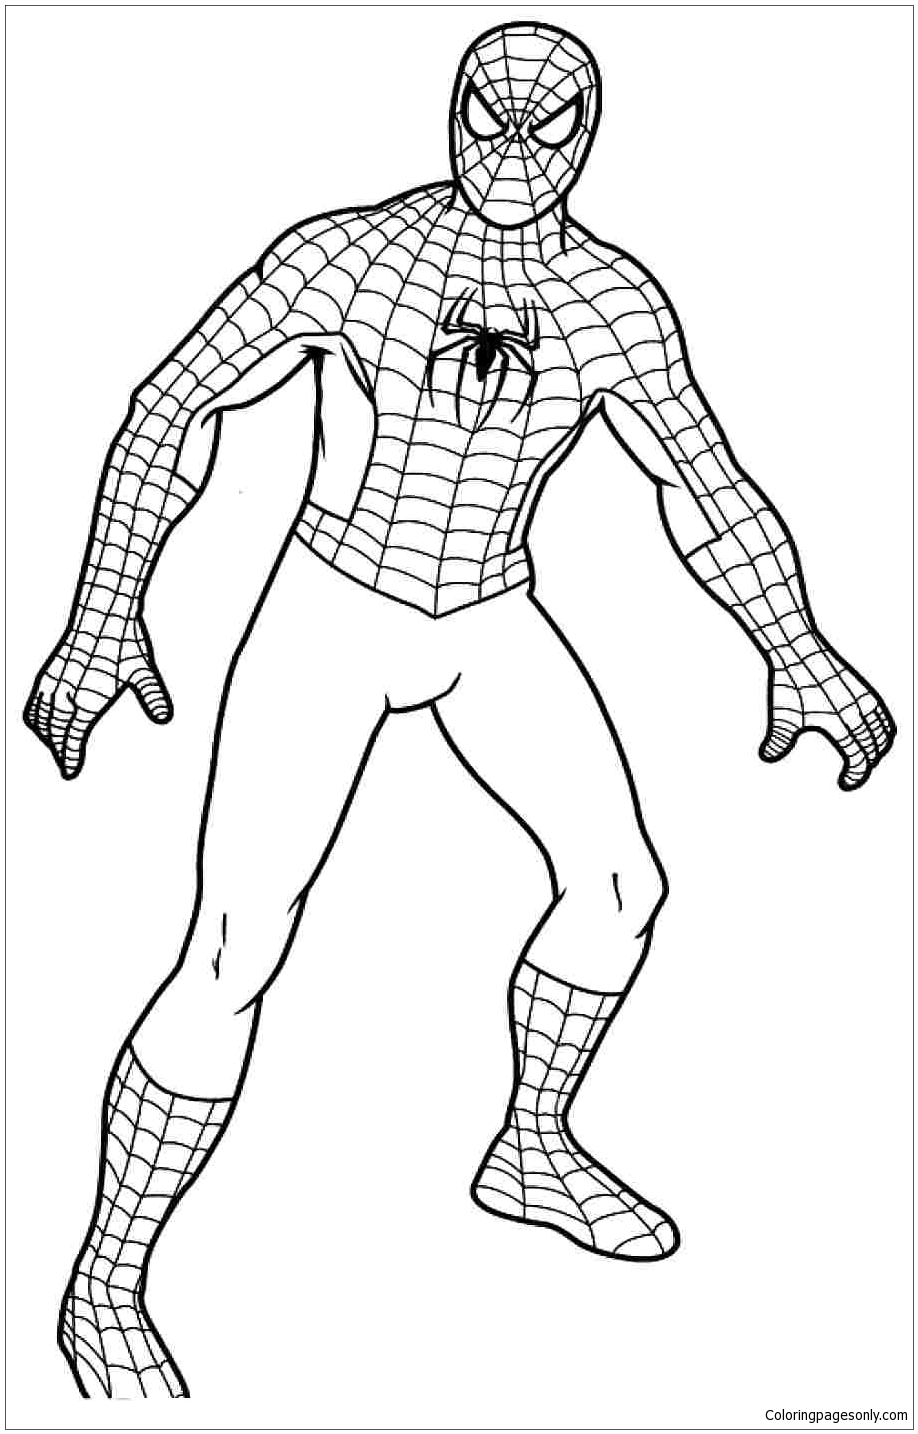 Download Spiderman 6 Coloring Page - Free Coloring Pages Online